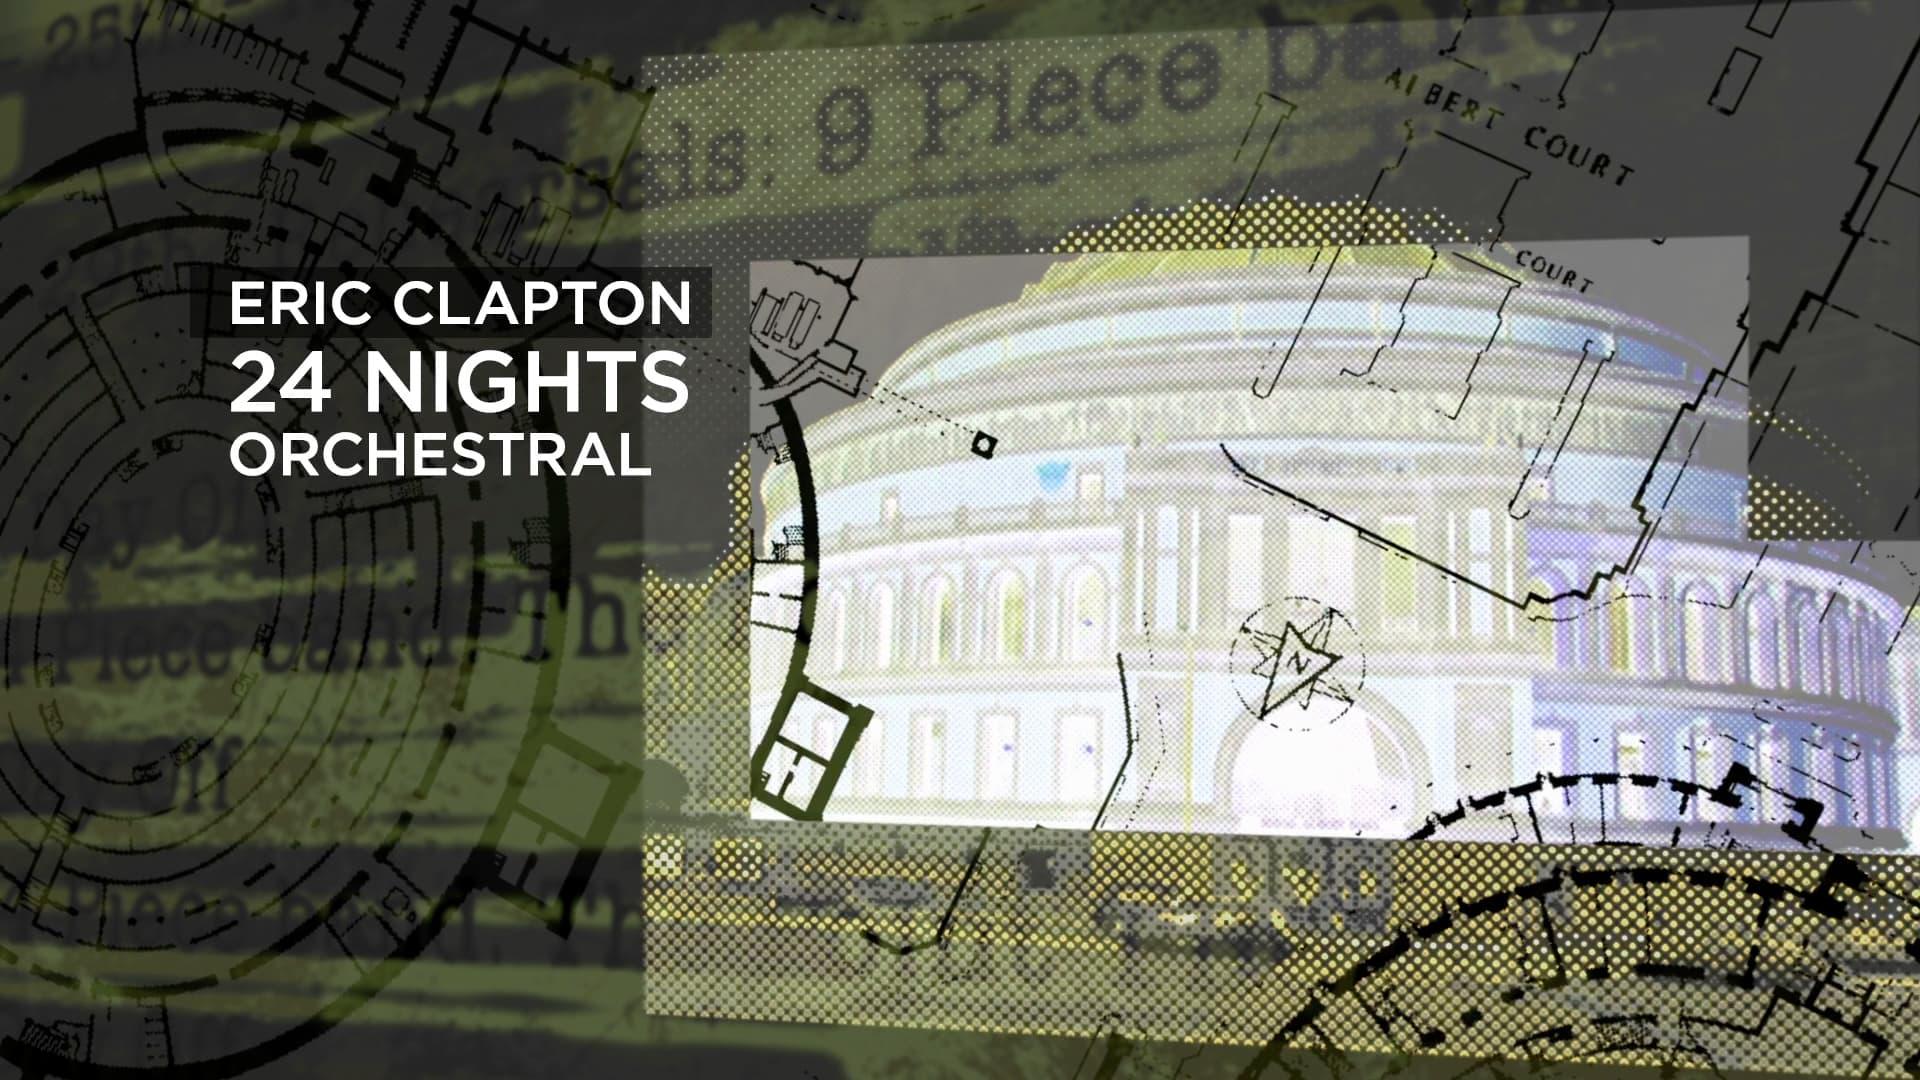 Eric Clapton: The Definitive 24 Nights - Orchestral backdrop